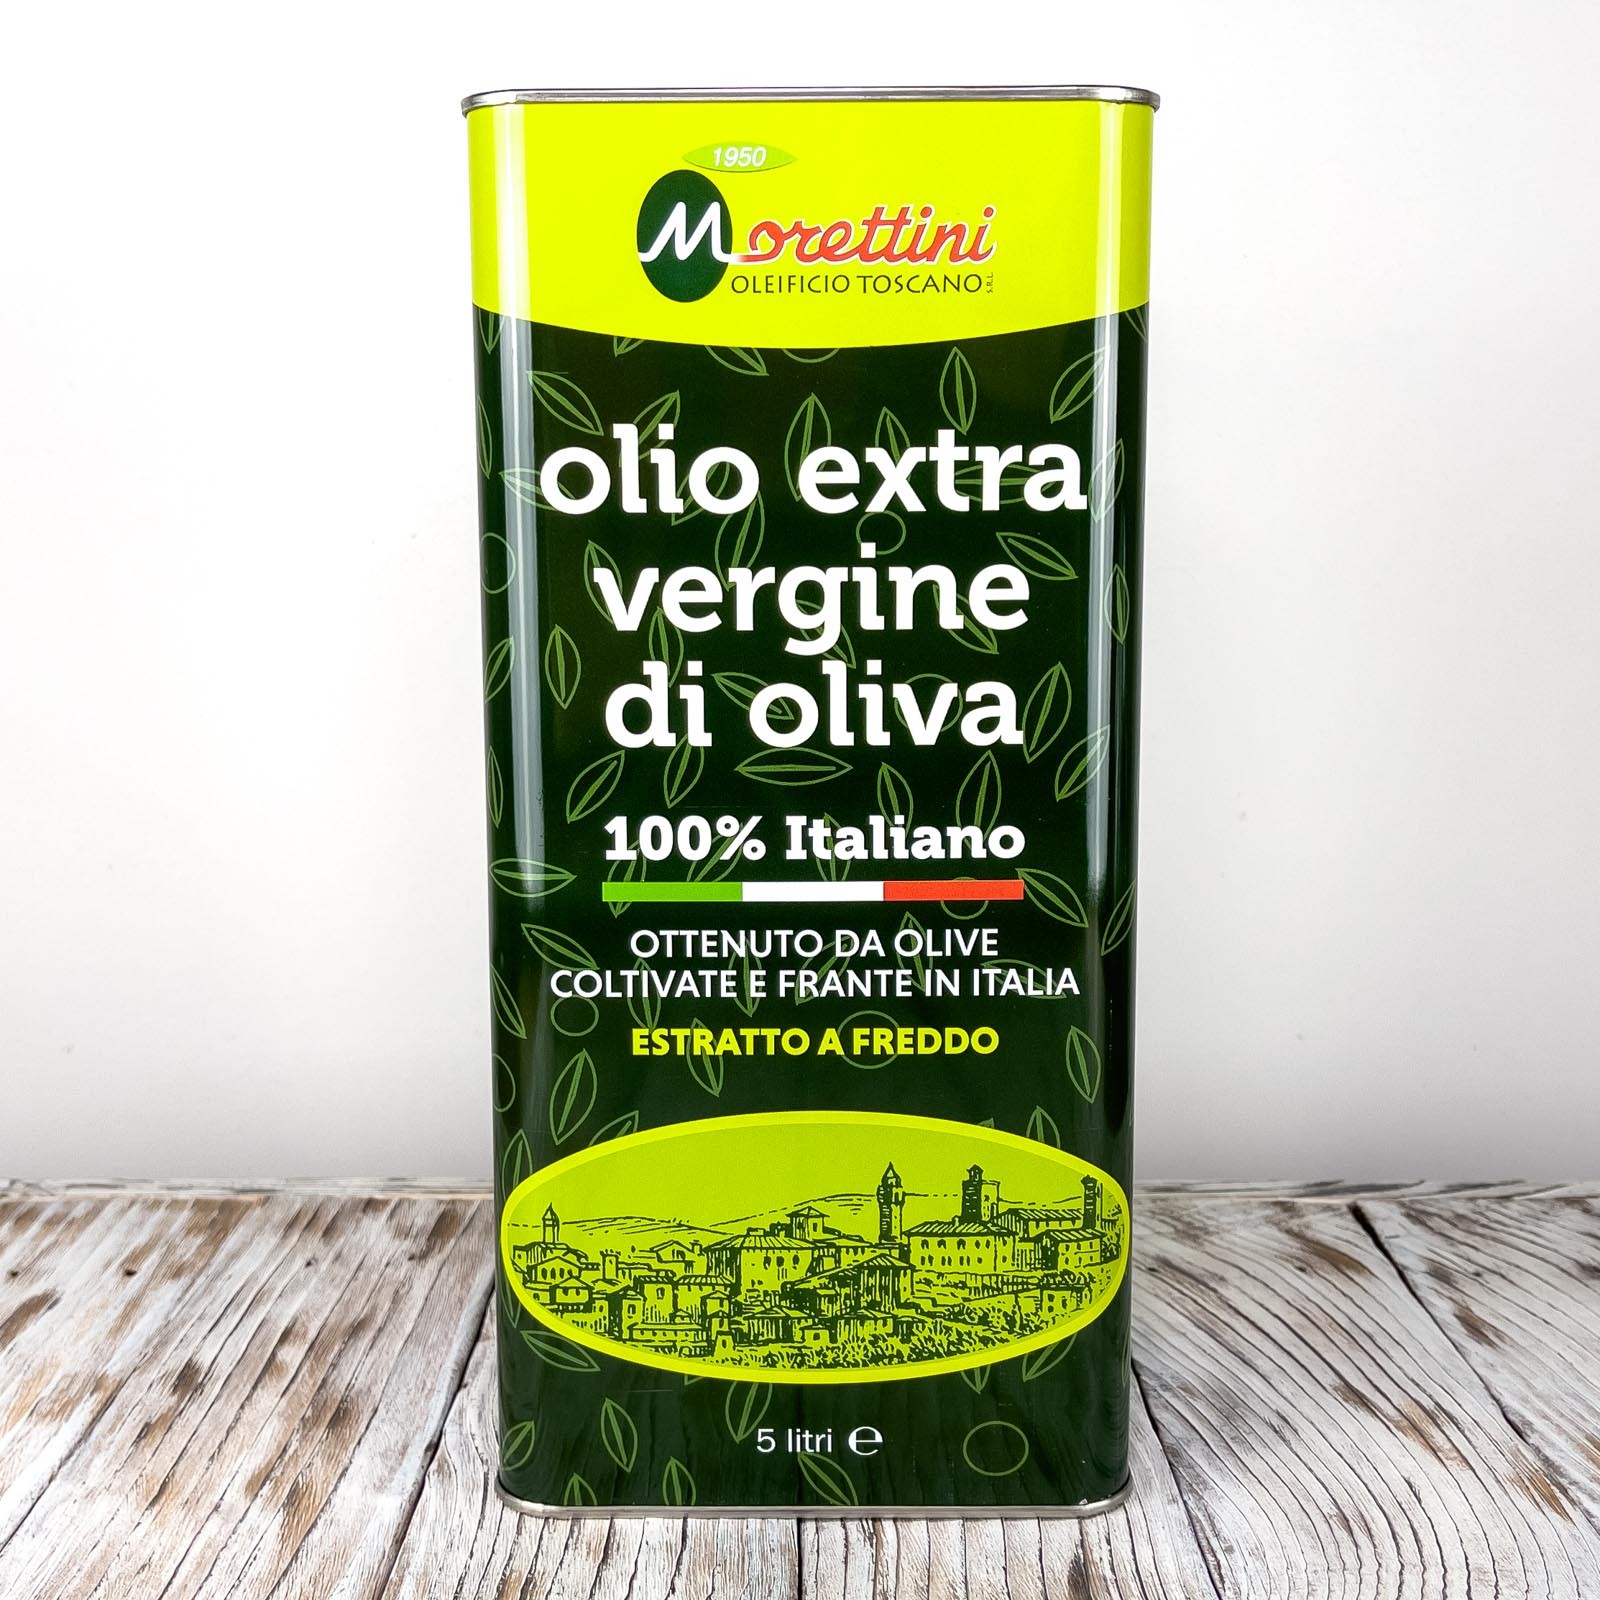 “Morettini 100% Italiano”, extra virgin olive oil, produced from a skilful blend of the best extra virgin oils of central Italy - Year of production 2021/2022.